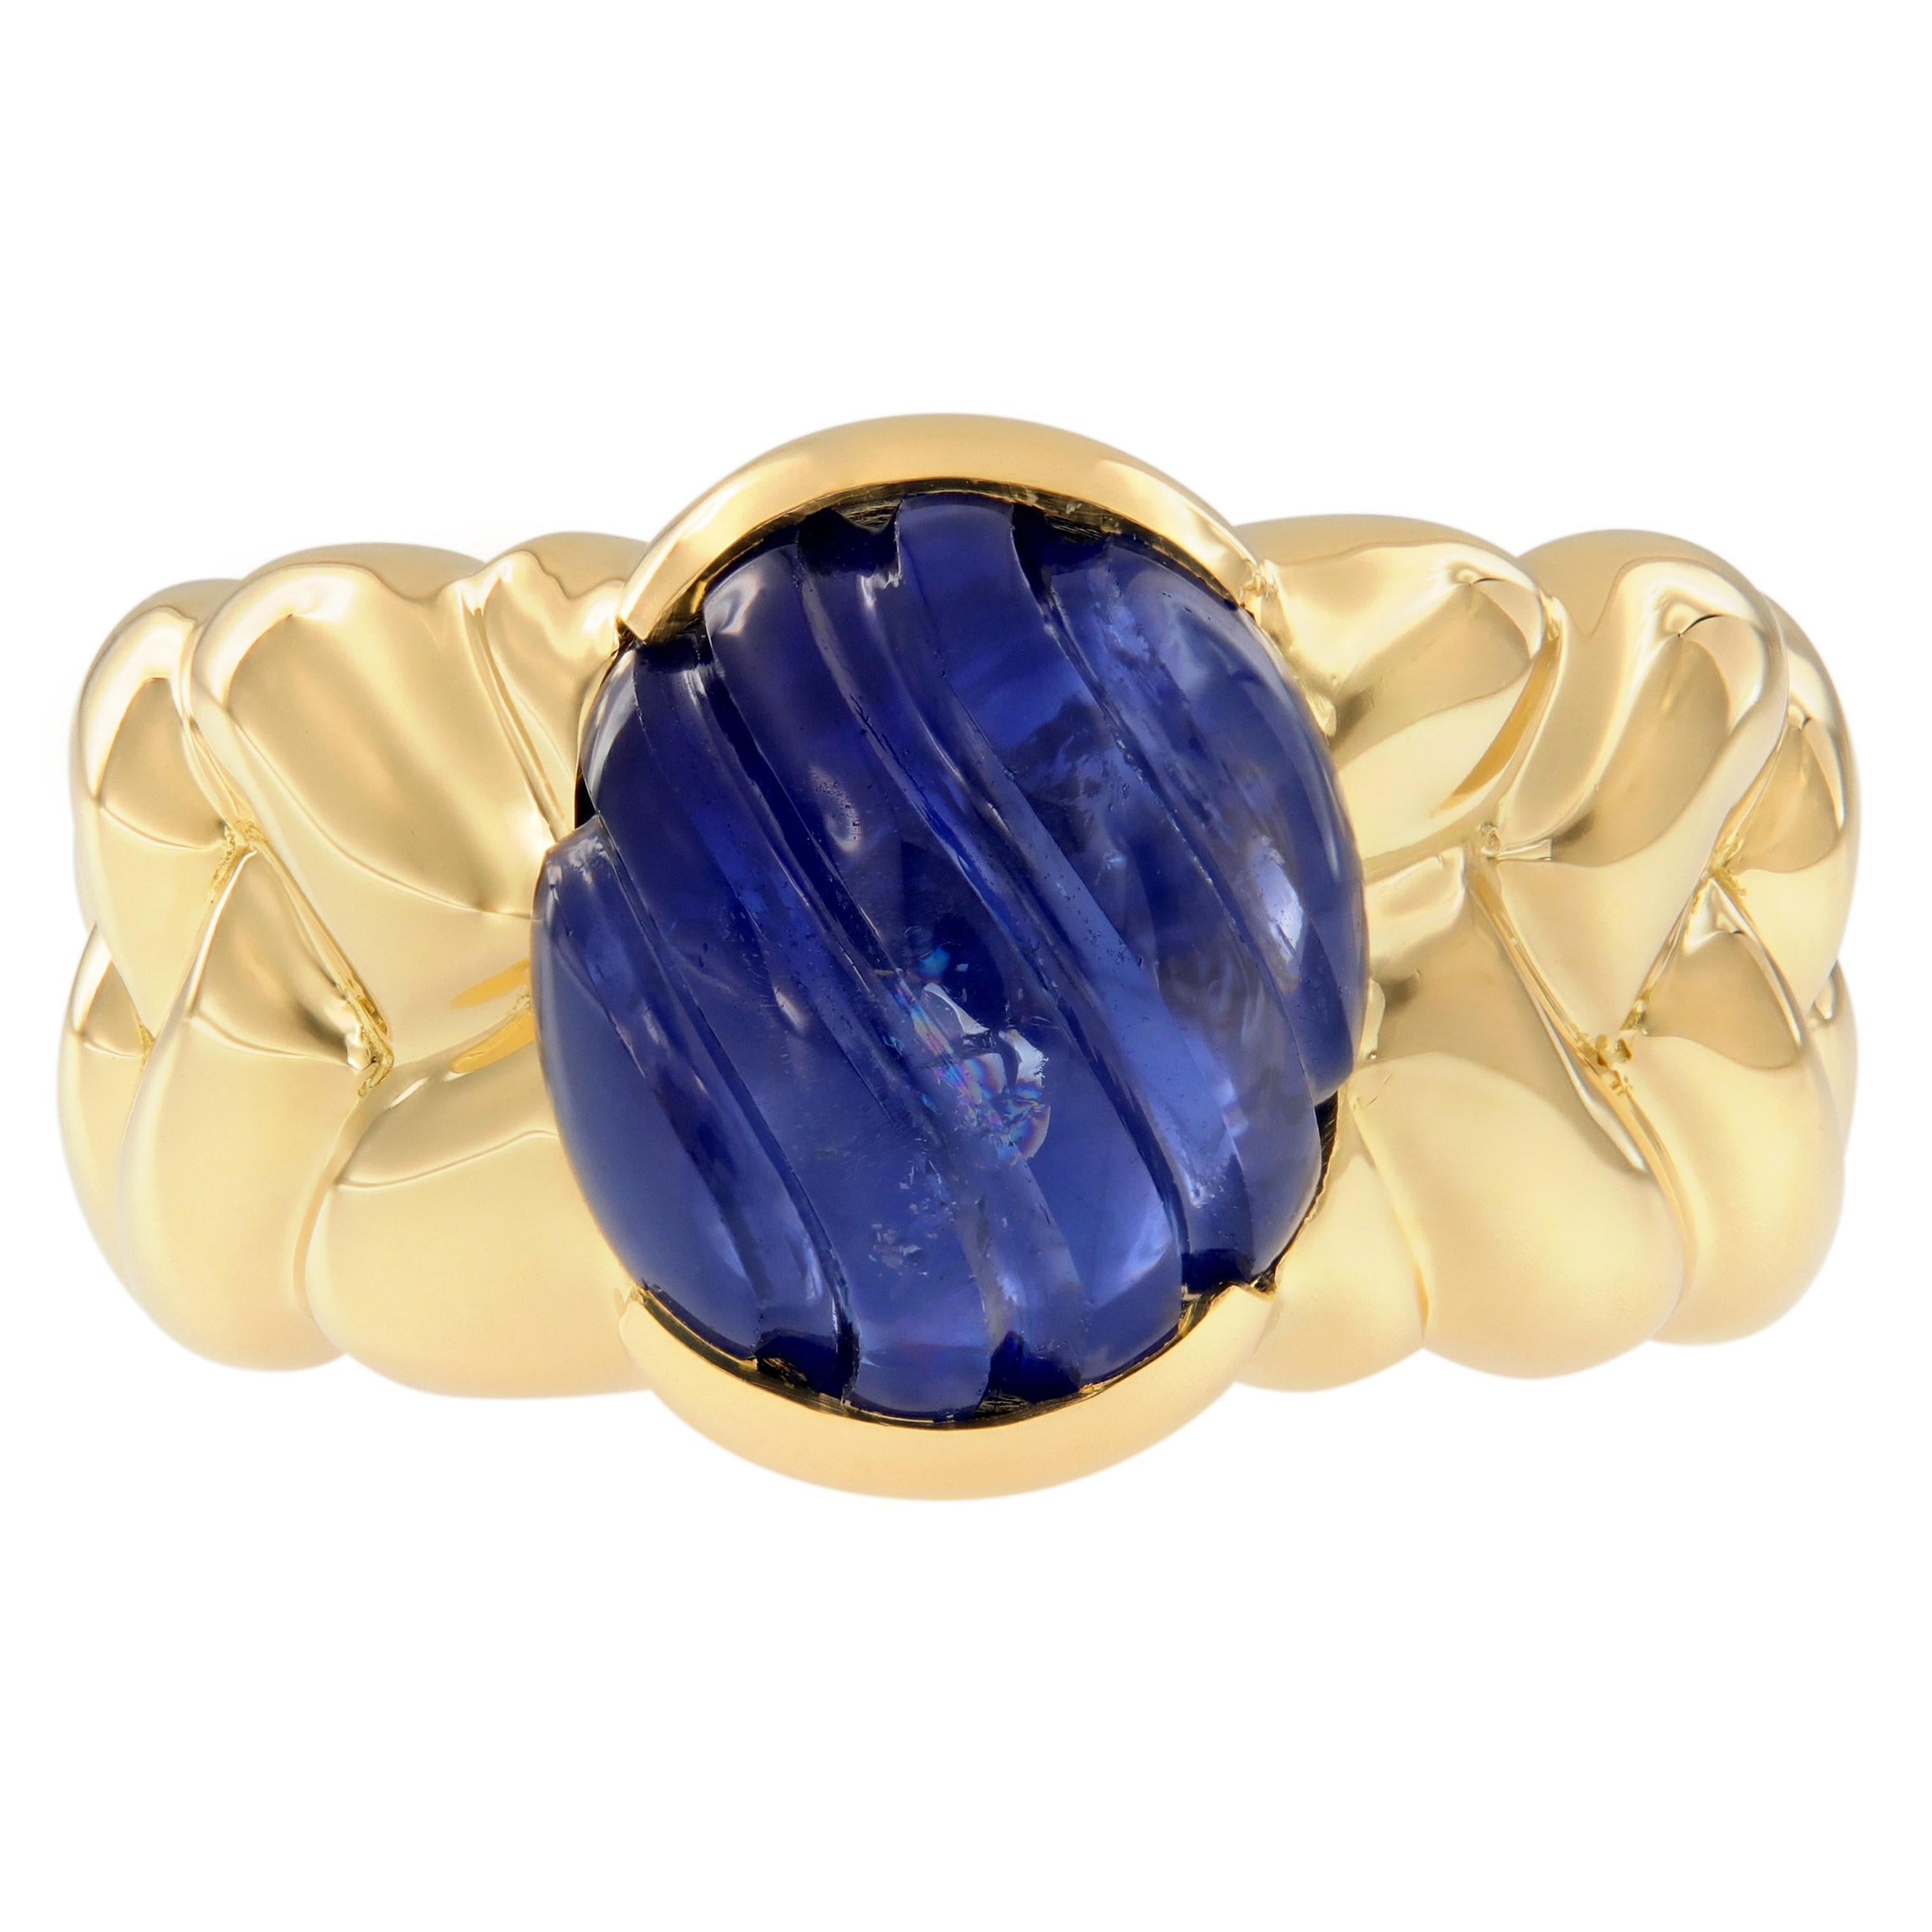 This modern ring features a bezel set blue sapphire center stone, accented with a braided band beautifully crafted in 18k yellow gold. Ring size is 6.25. Weighs 10.1 grams.

Blue Sapphire 6.67 ct